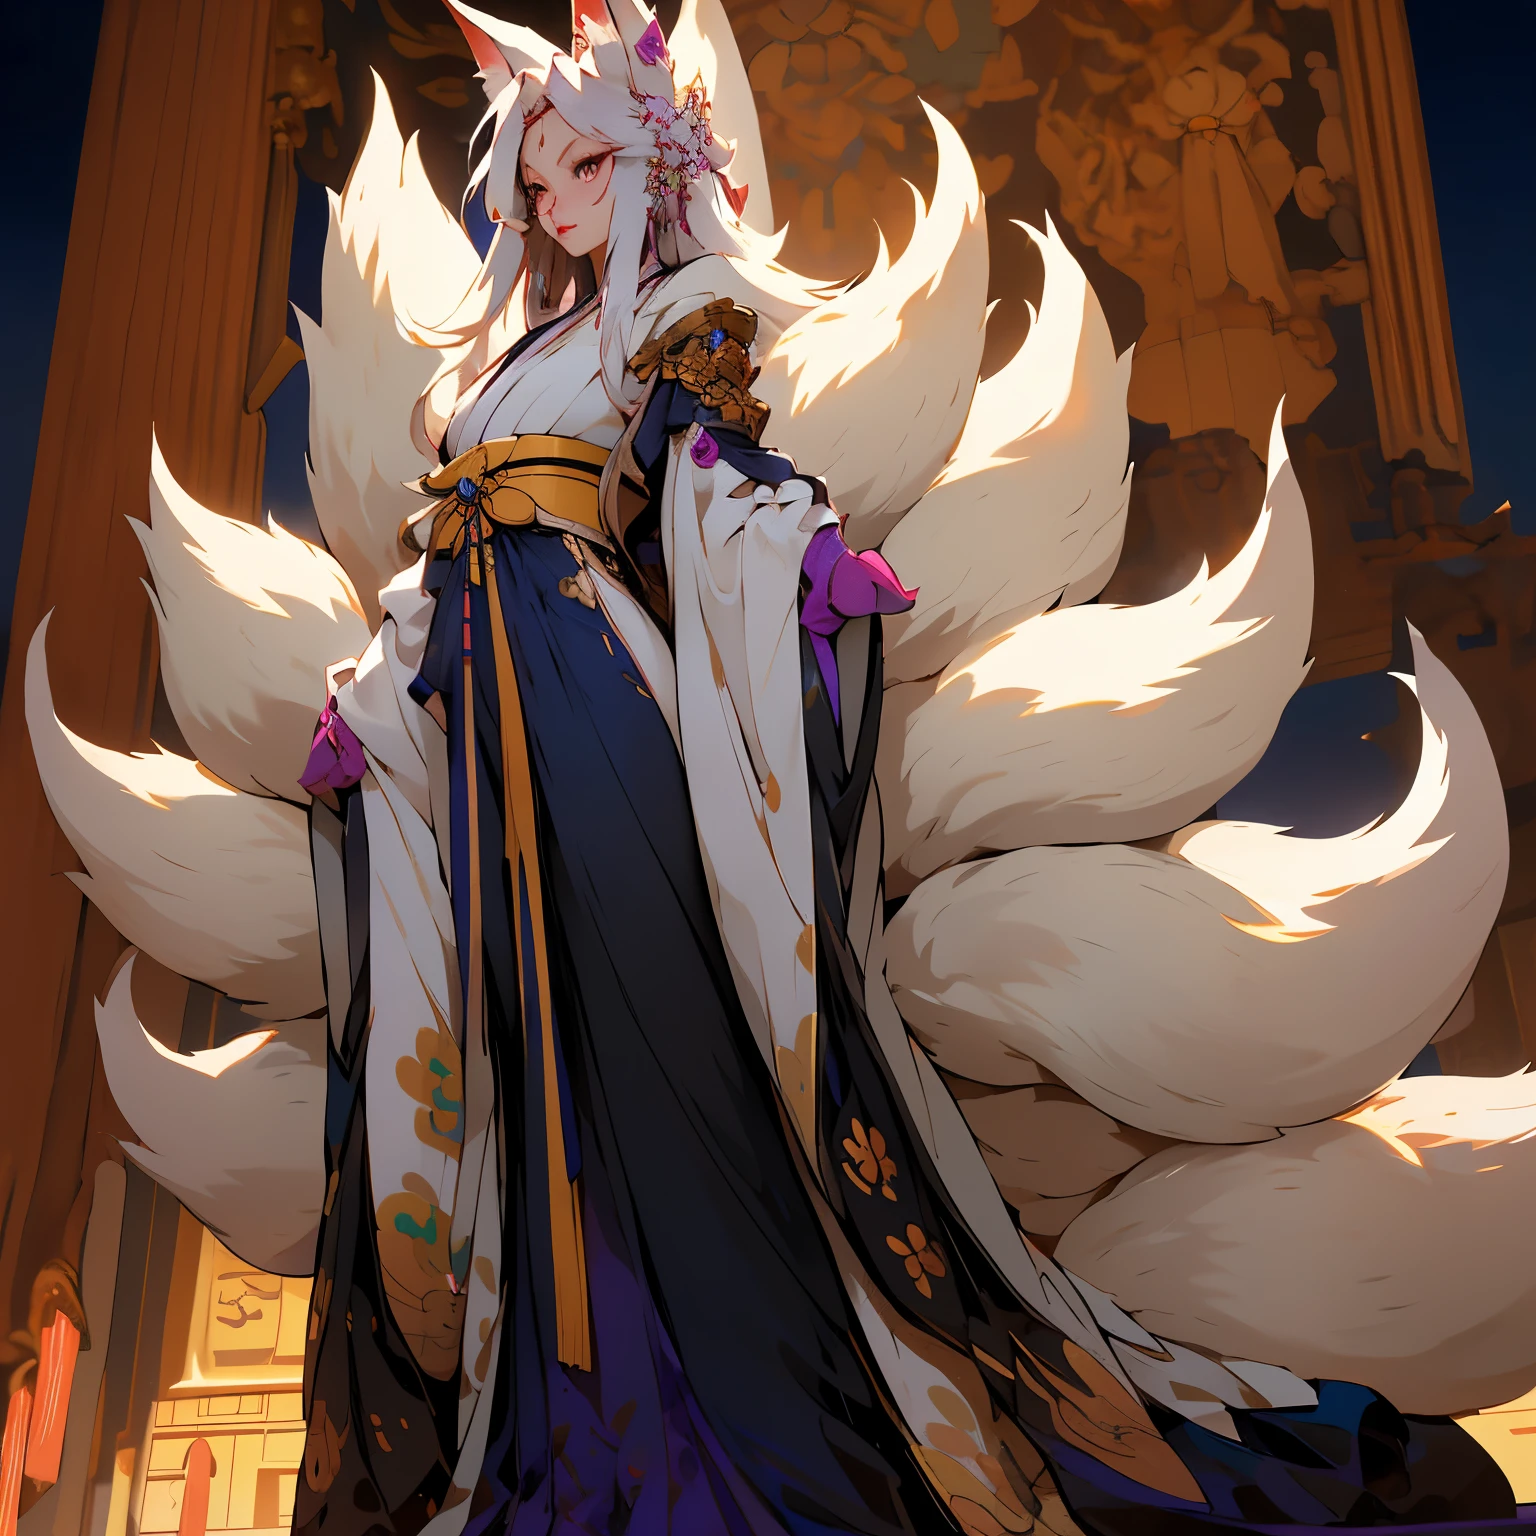 Mature fox lady, Crown princess of the fox race, original, (masterpiece), (figure), (extremely fine and beautiful), (perfect details), (Unity CG 8K Wallpaper:1.05), (beautiful and clear background:1.25), (Depth of the bounds written:0.7), (1 cute girl with (2 Fox Ears:0.9) and (fox tail on the back:1.2) stands aside the river:1.15). (cute:1.3), (detailed beautiful eyes:1.3), (beautiful face:1.3), silver hair,  (purple hair:0.7), (purple ears:0.7), long hair, (Japan no Kimomo:1.25), (hair blowing in the wind:1.1), (blue eyes:1.1), (girl:1.1), Butterflies are flying around, (Moonlight:0.6), wood, (summer), (night:1.2), (close:0.35), (gloves:0.8), alone